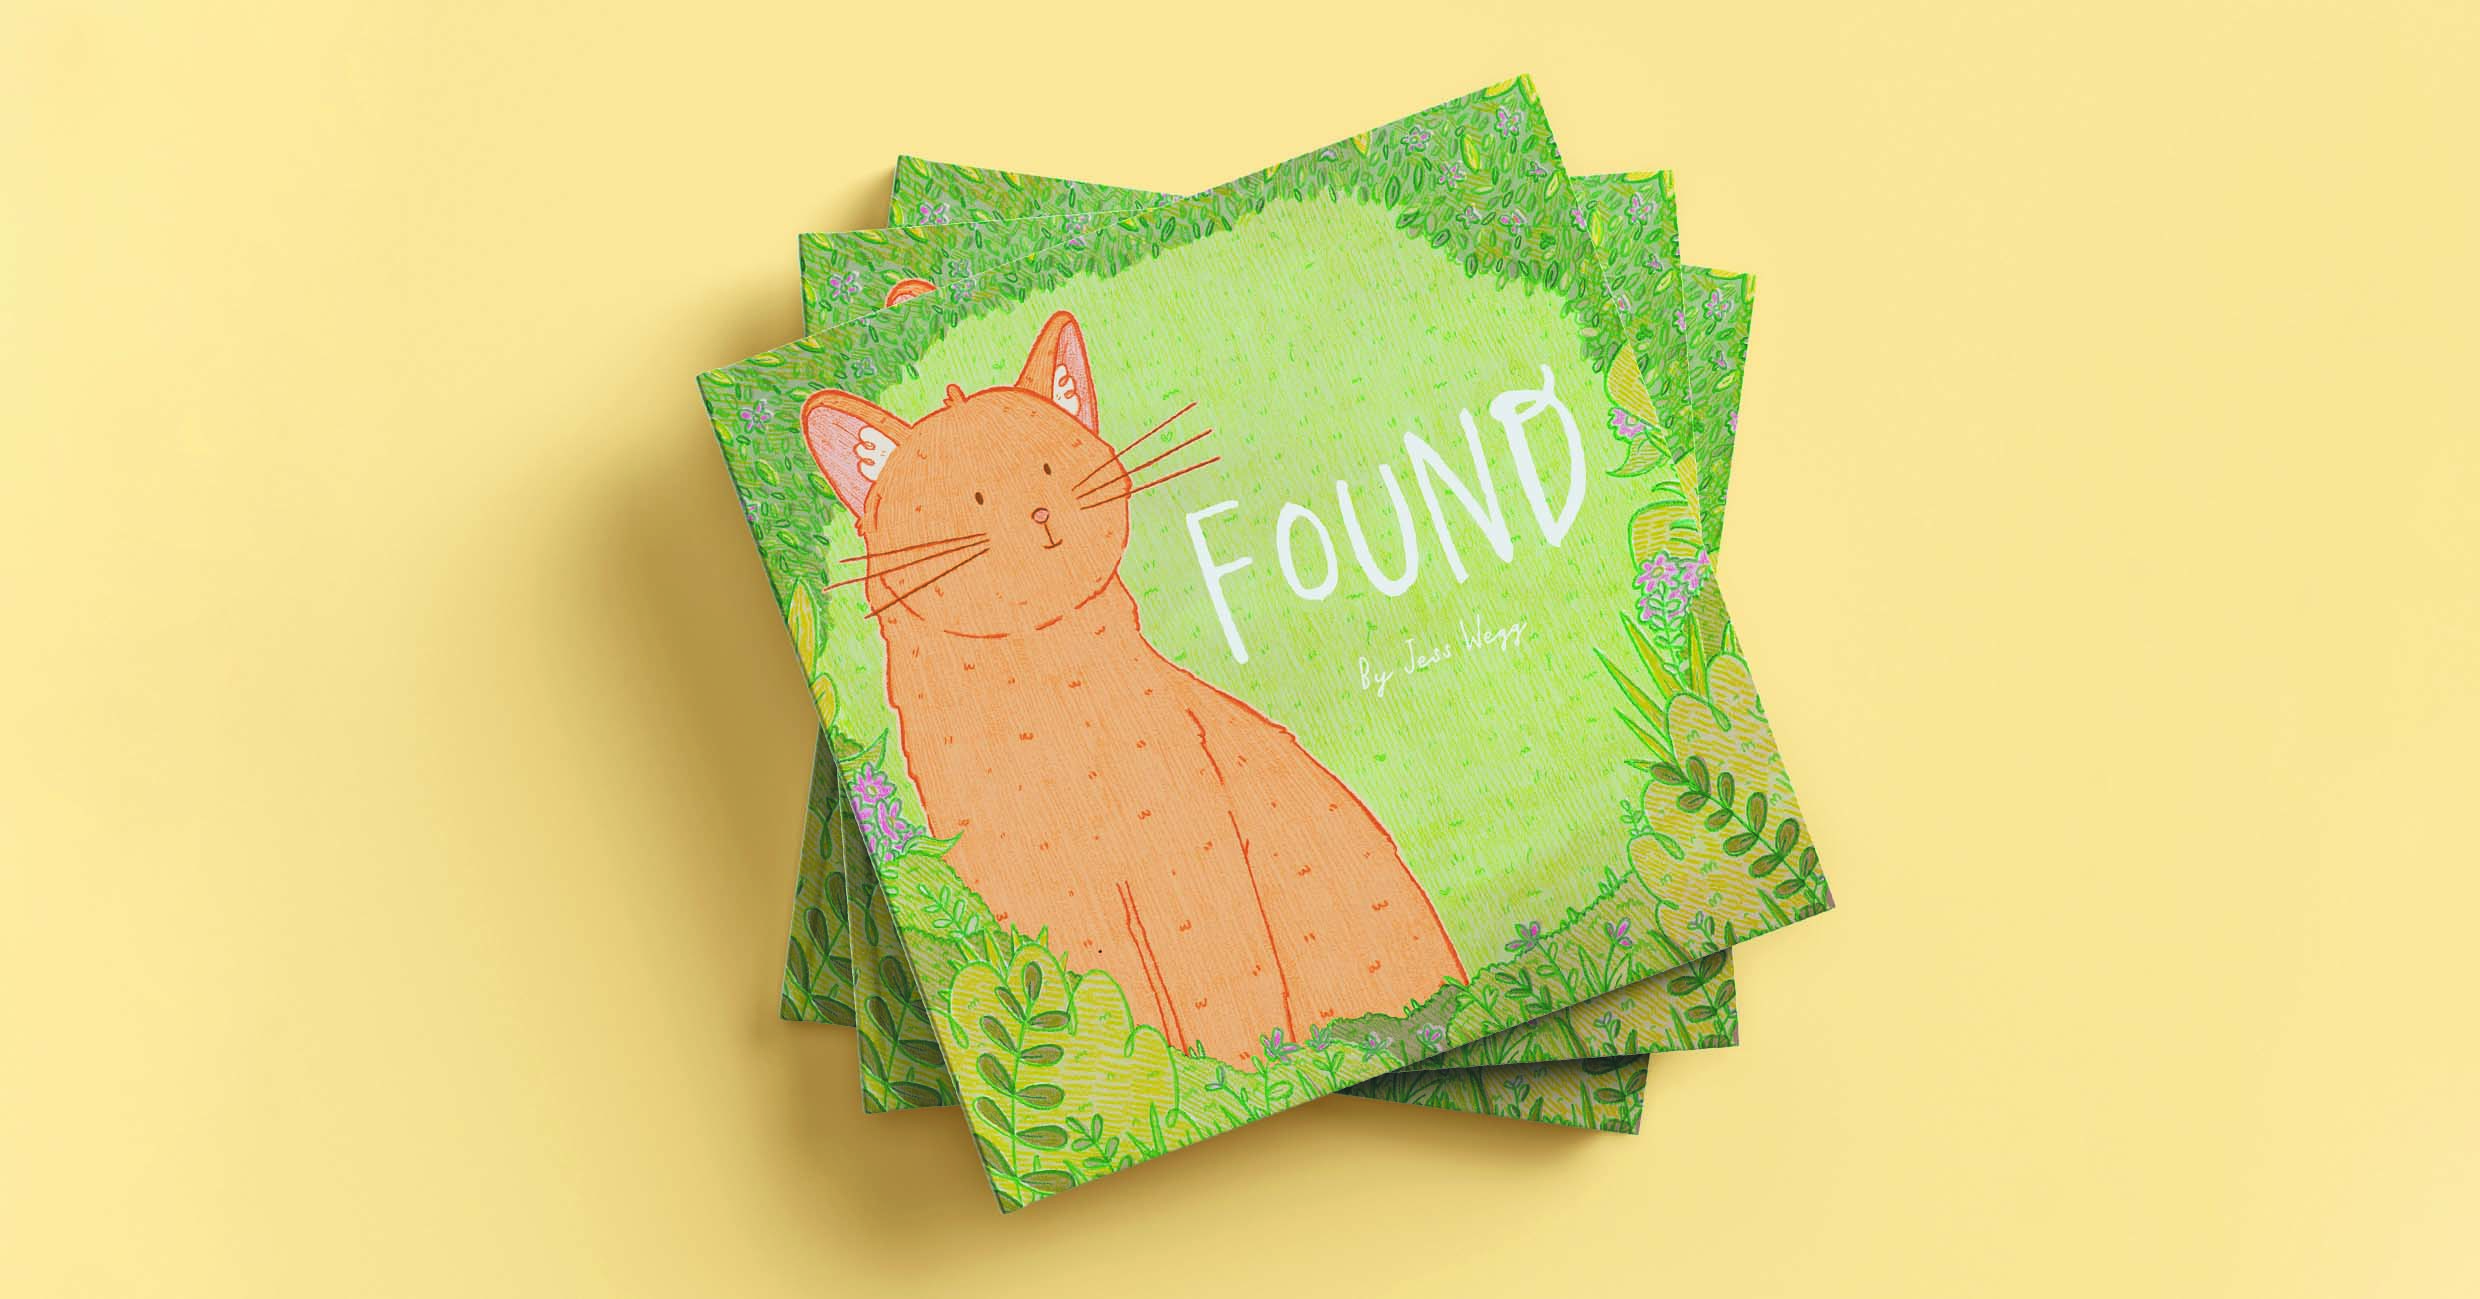 Digital mock-up of a picture book cover containing a cat and greenery.